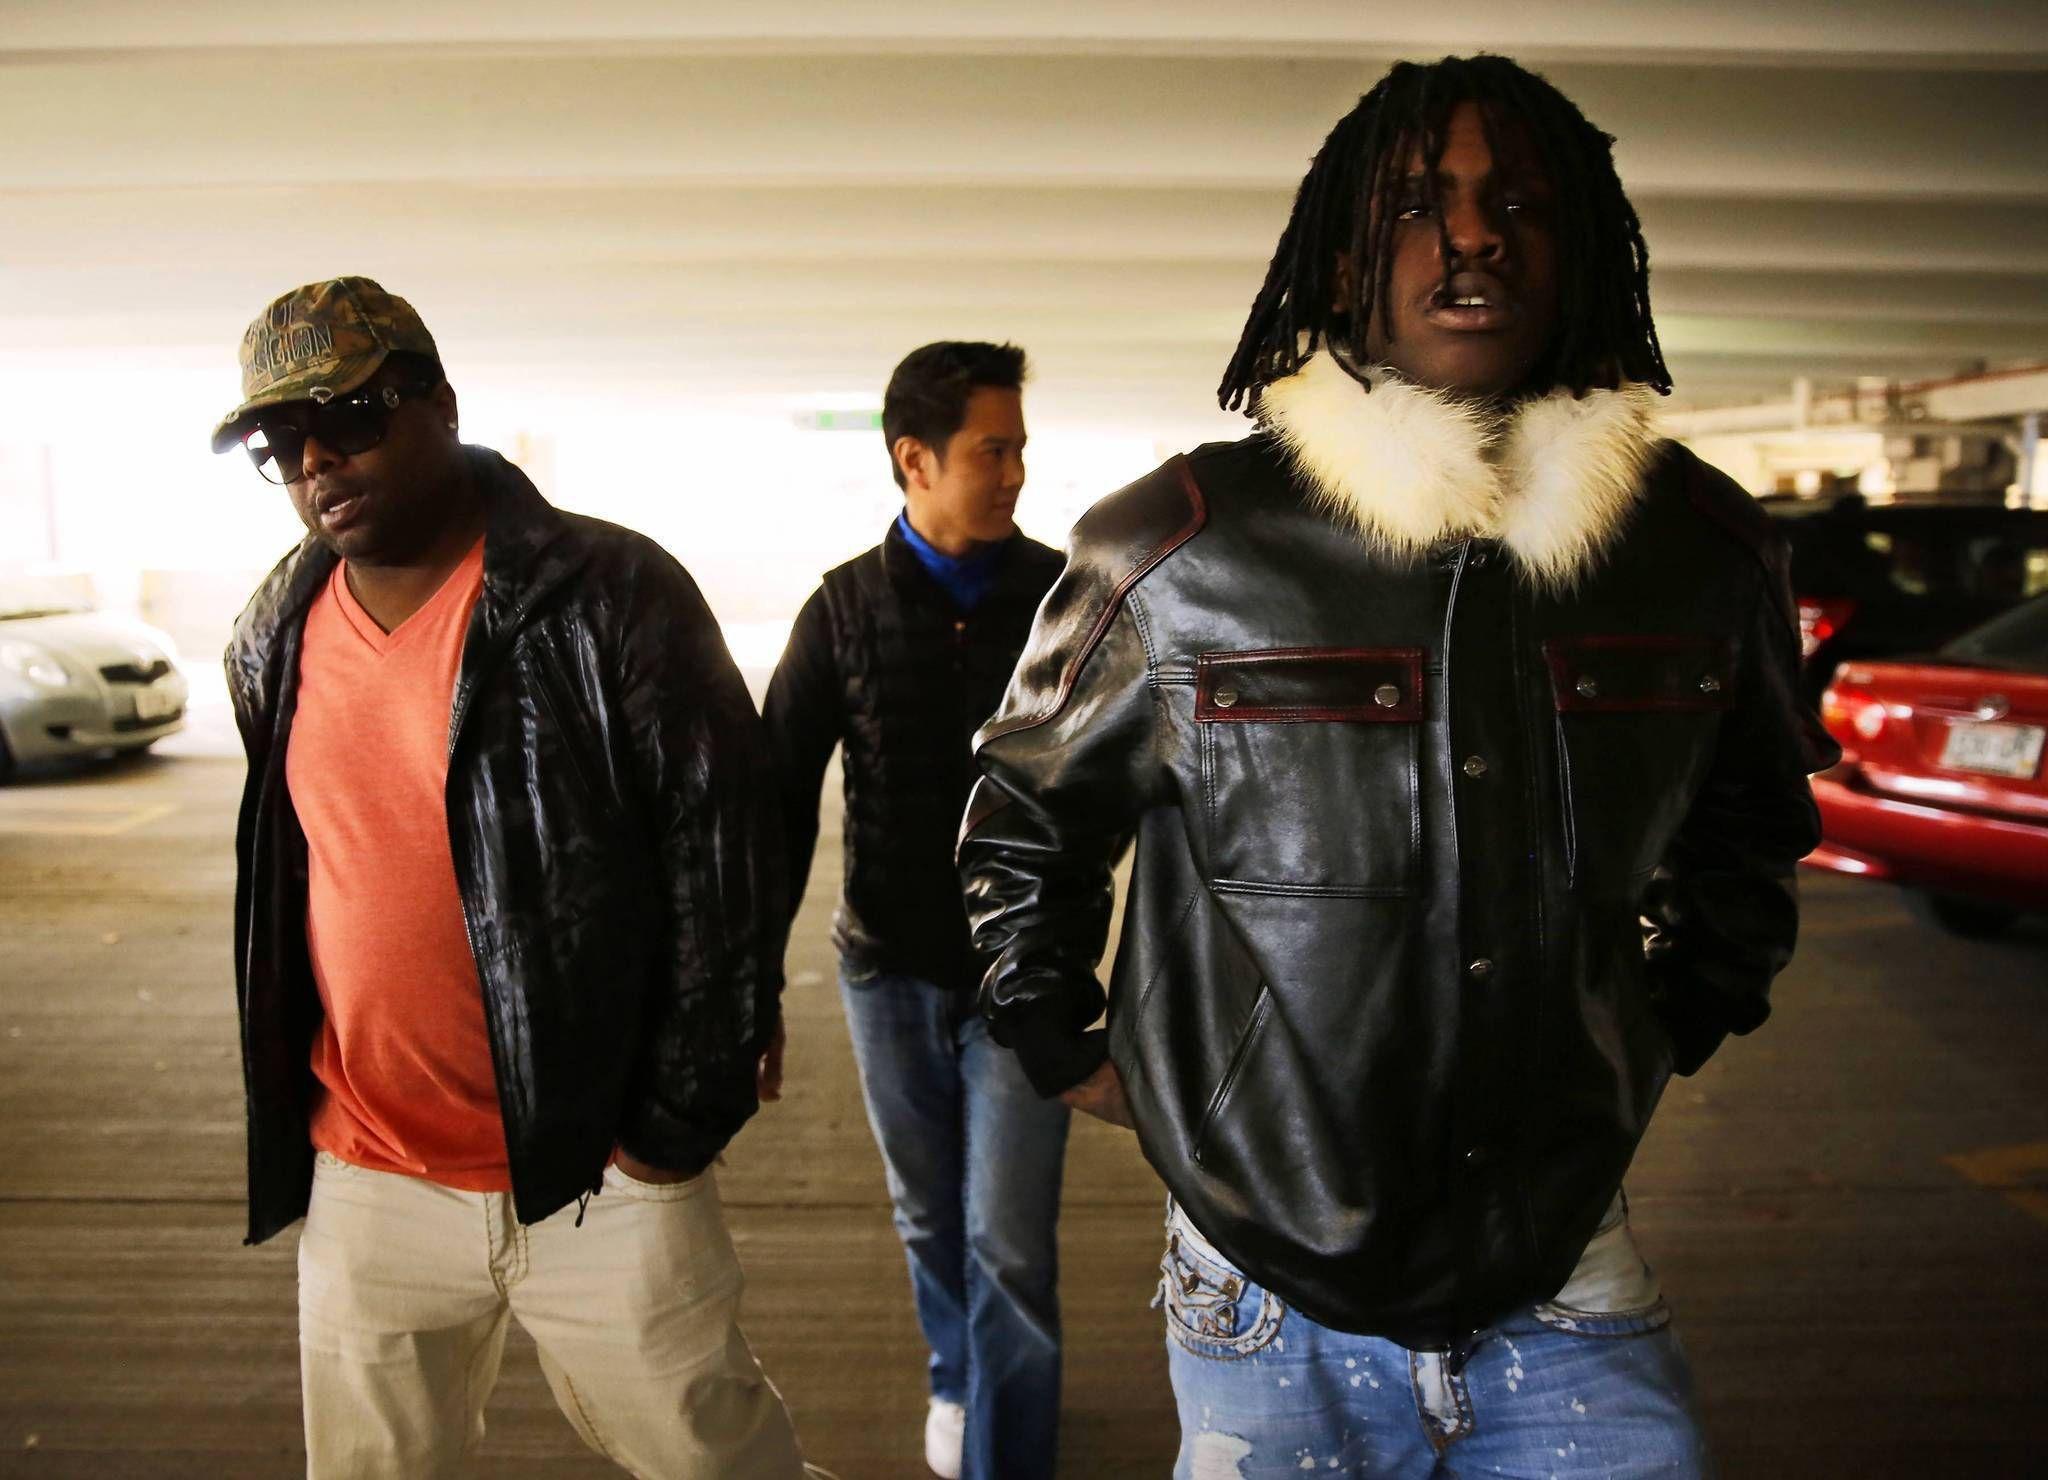 Chief Keef Wallpaper Image Photo Picture Background